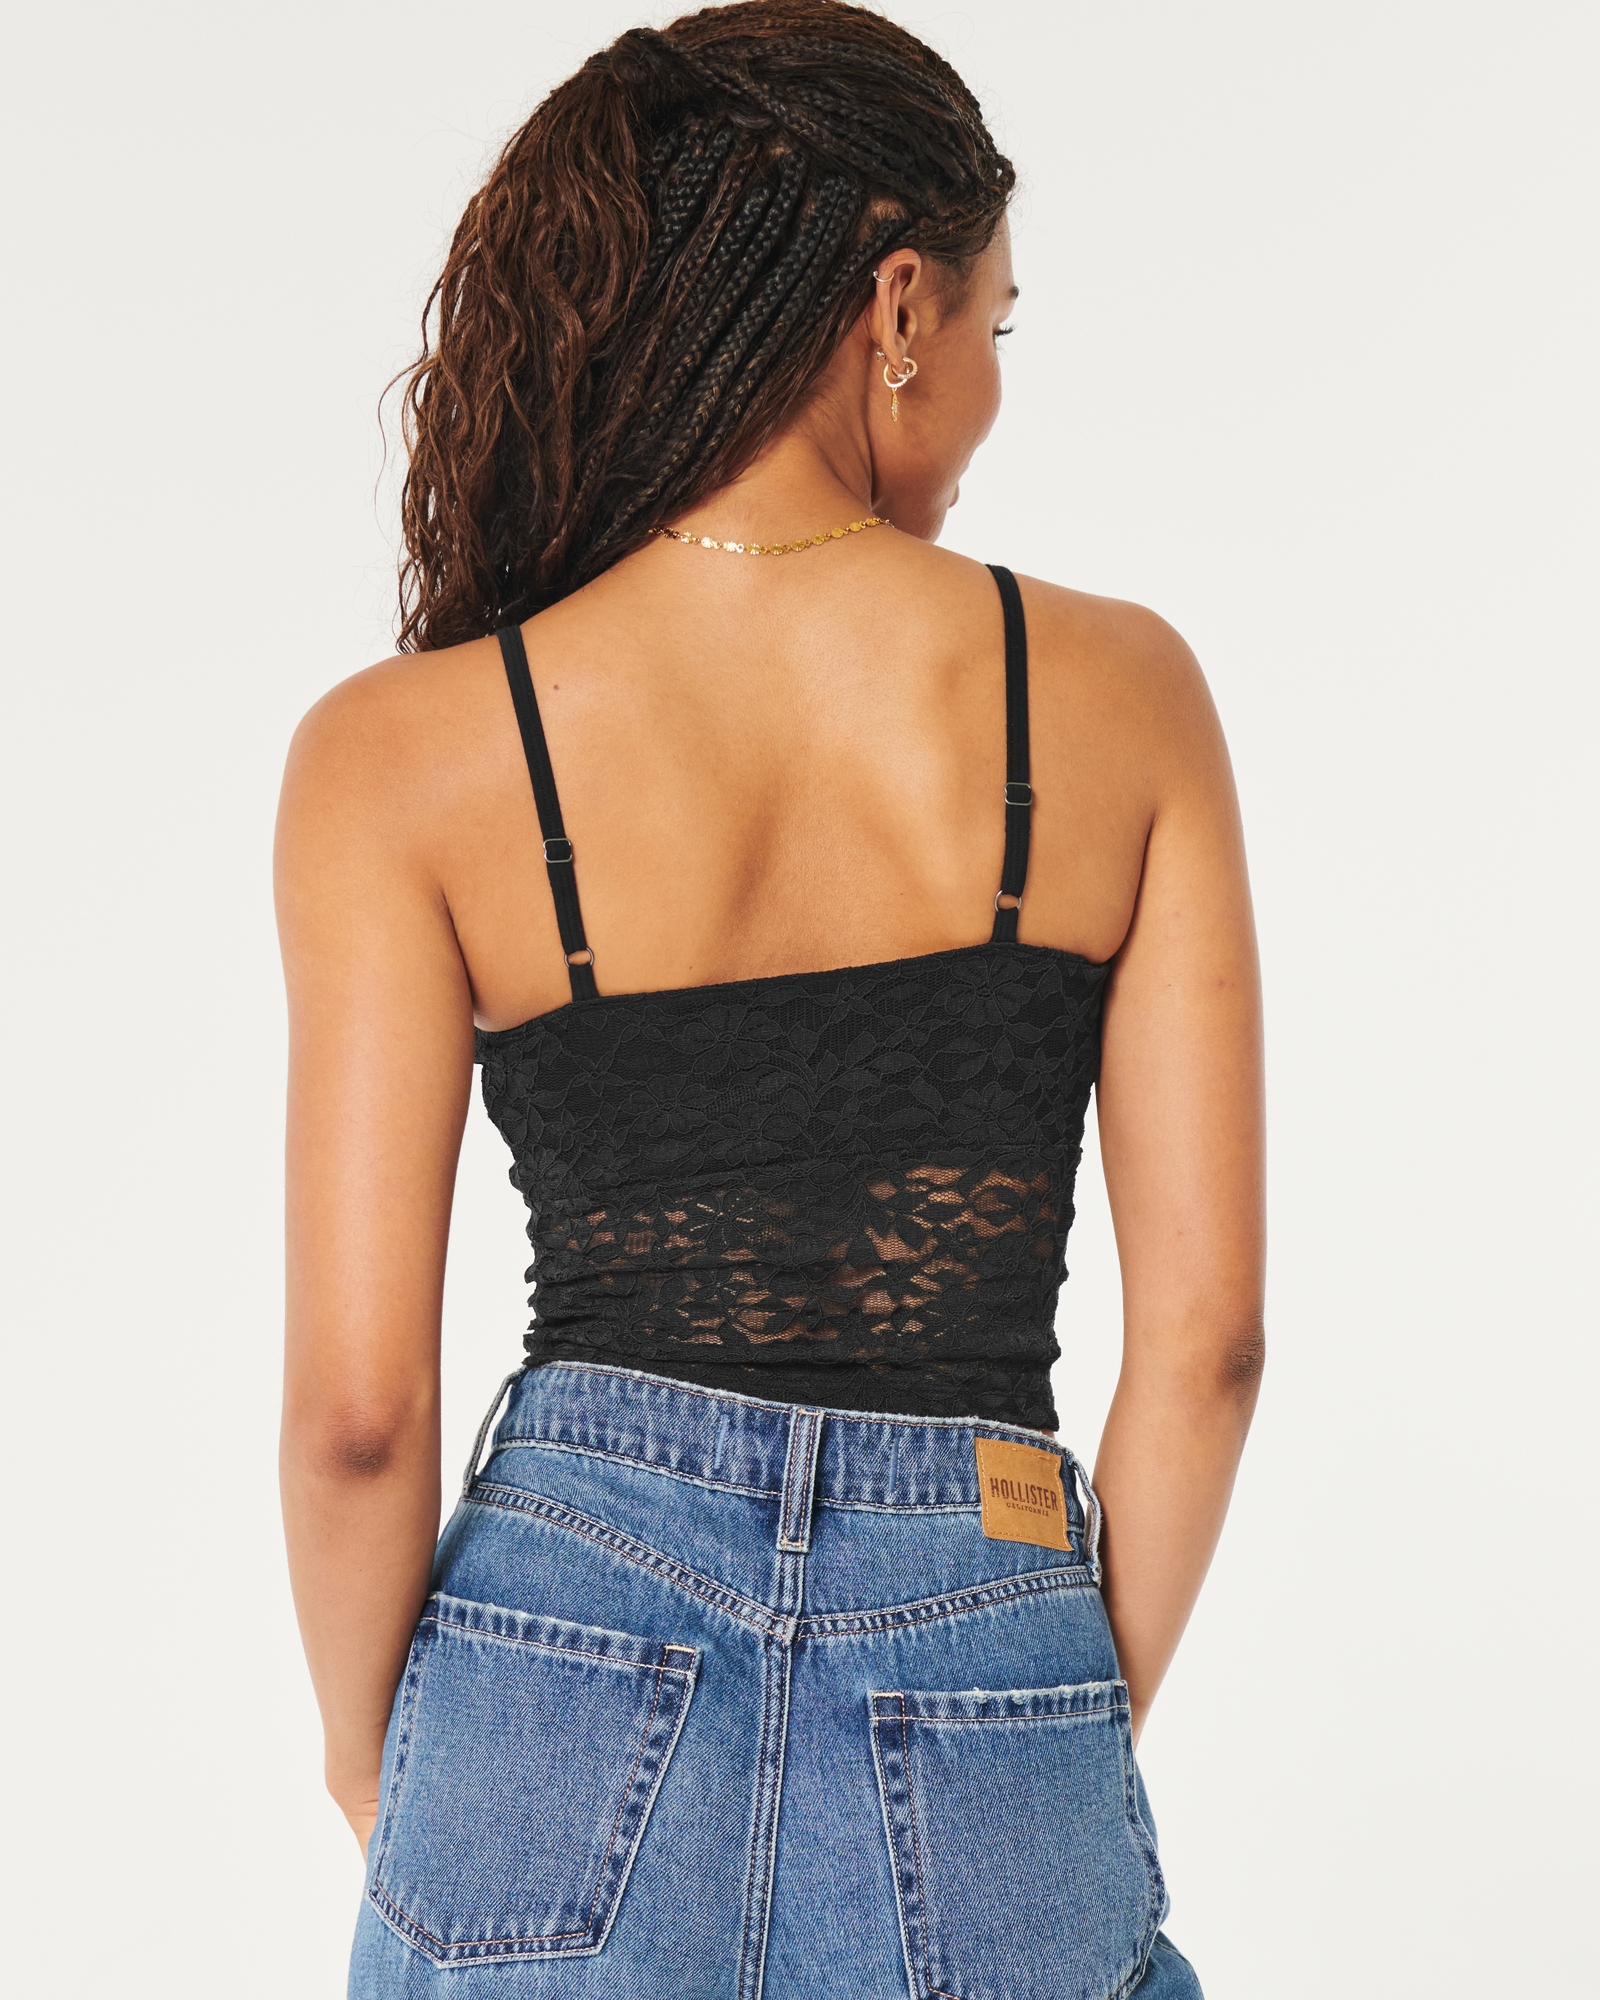 Modest Lacey Cropped Cami in Black - JamieRose & Co.